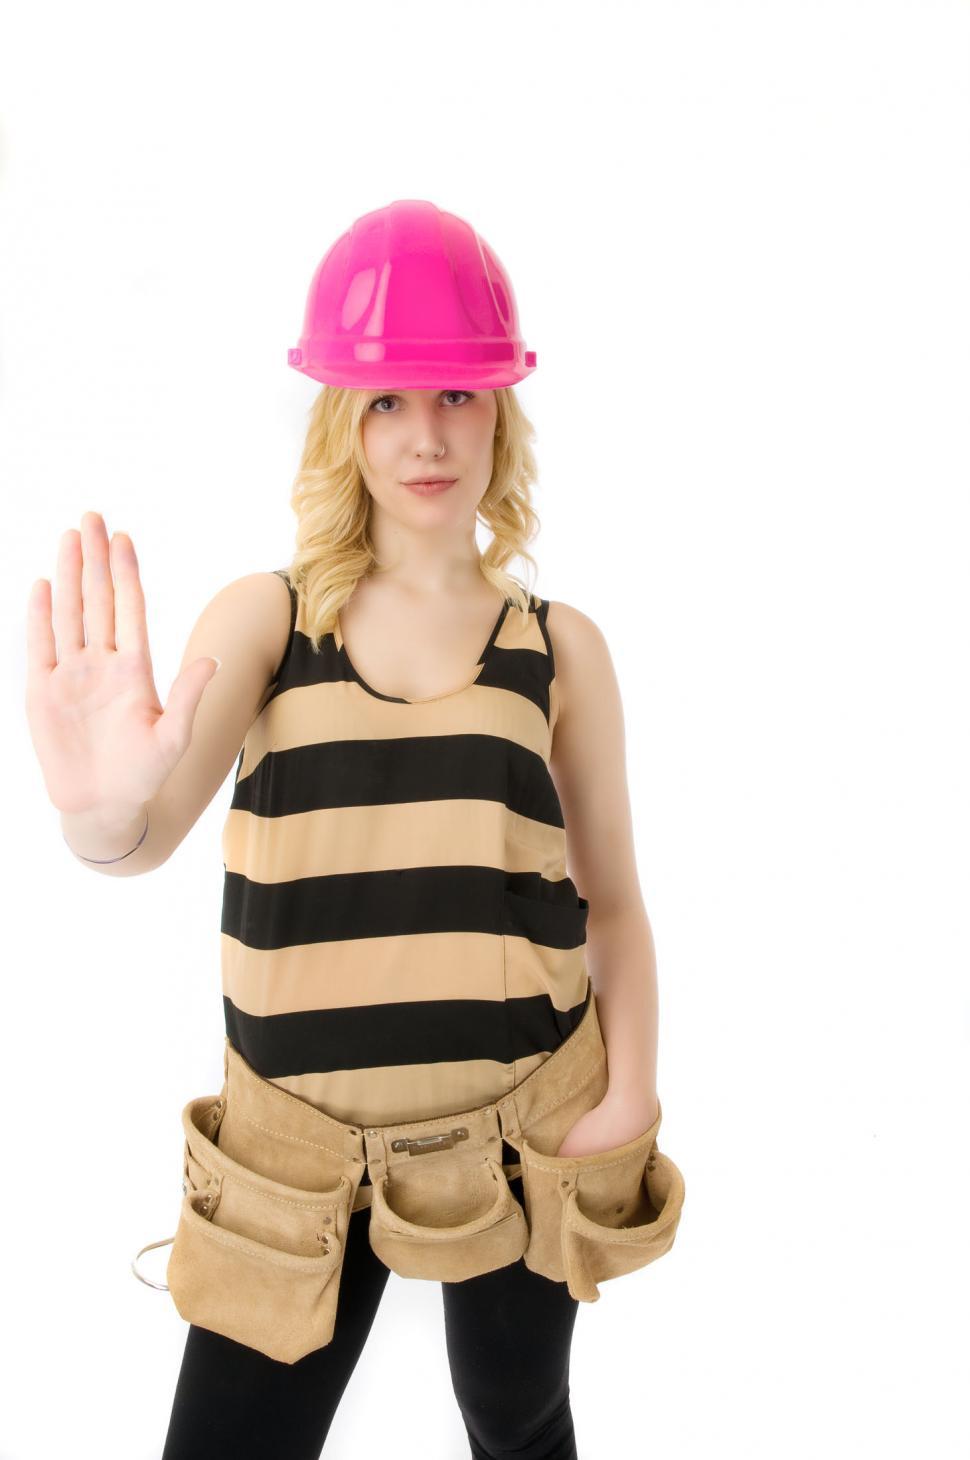 Free Image of Construction Worker 